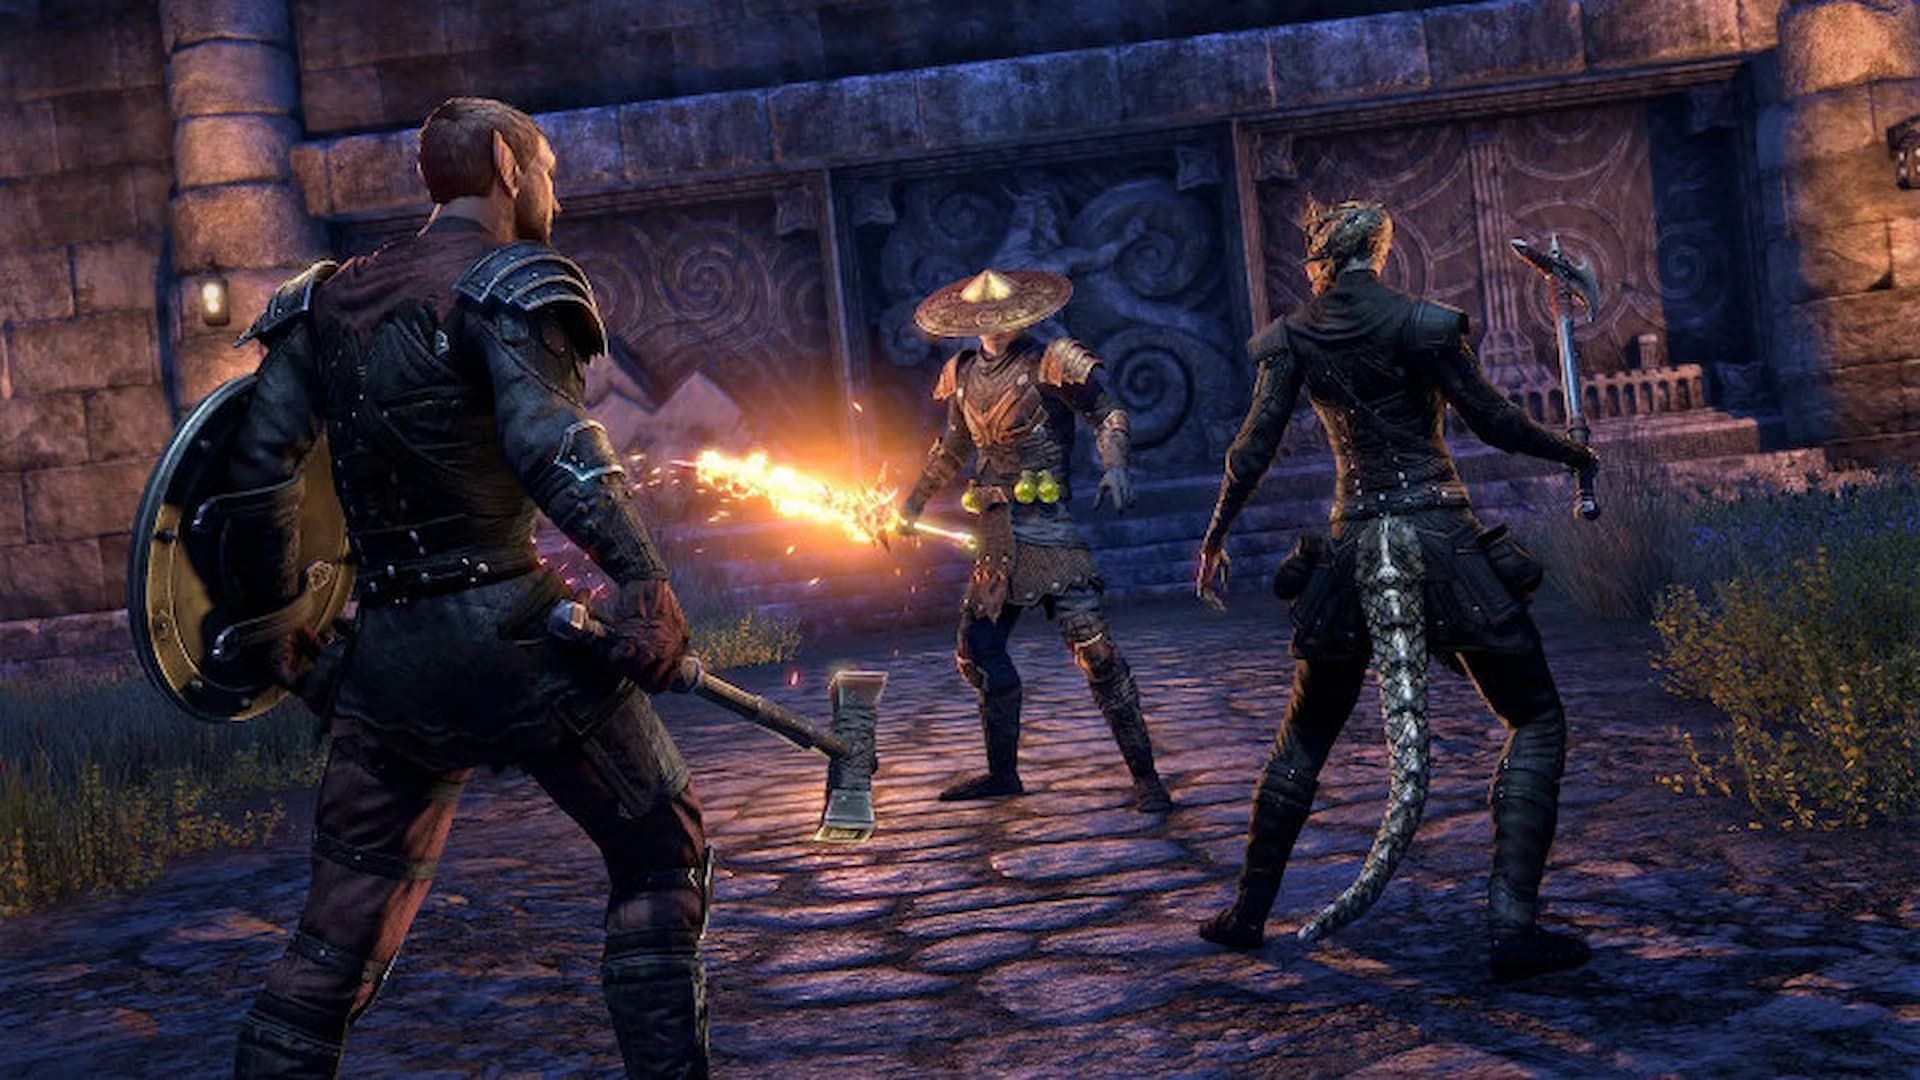 Two people with a hammer and an axe battling against one person with a flaming sword in The Elder Scrolls Online